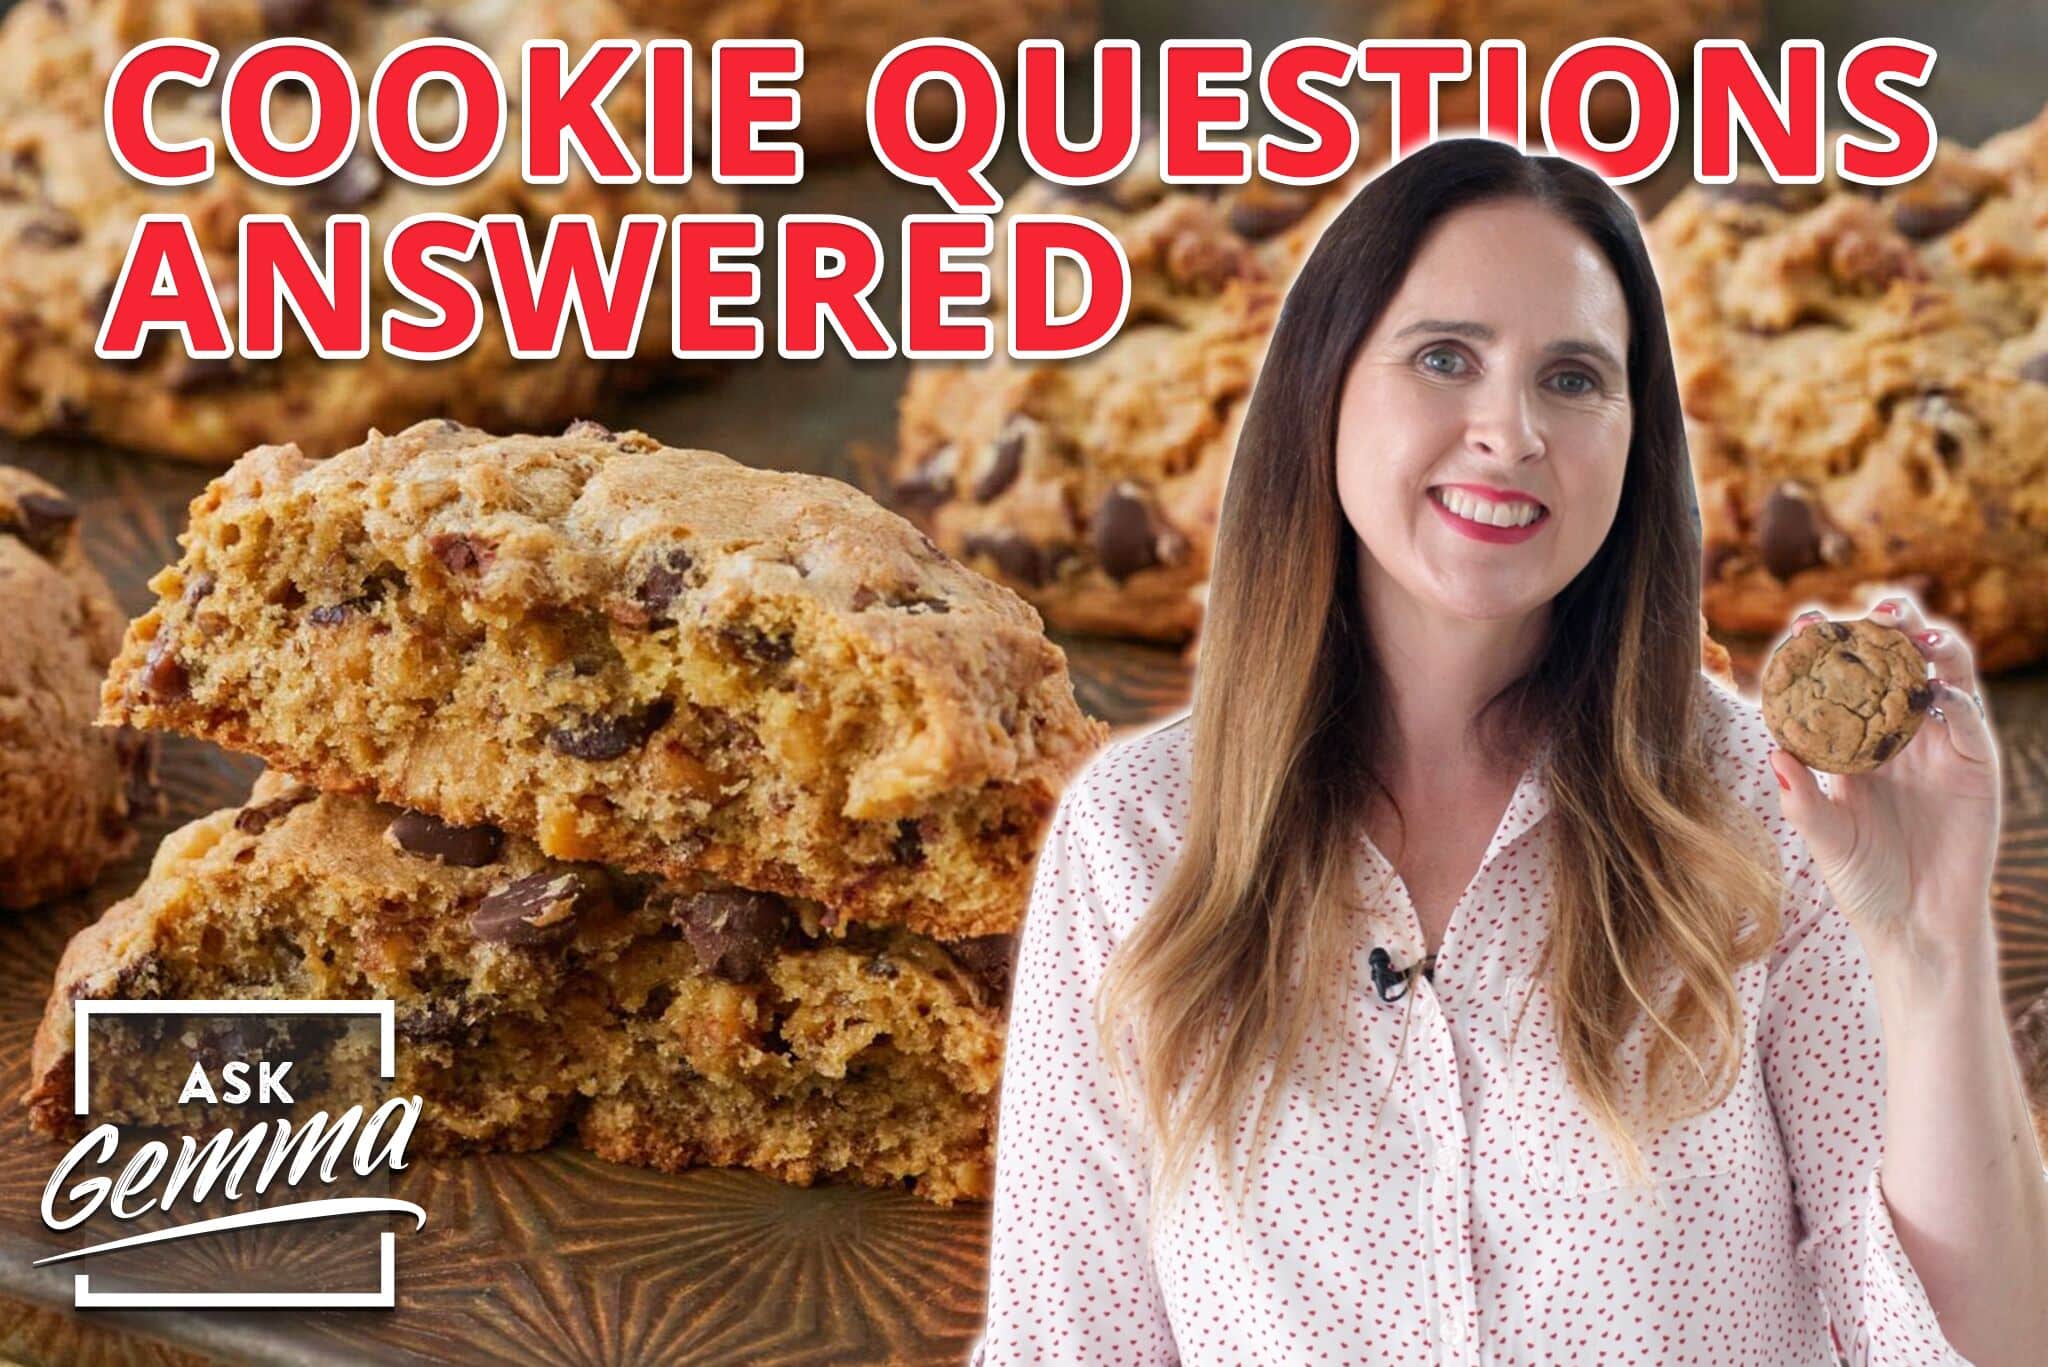 https://www.biggerbolderbaking.com/wp-content/uploads/2023/09/Cookie-Baking-Questions-Answered-Thumbnail.jpg